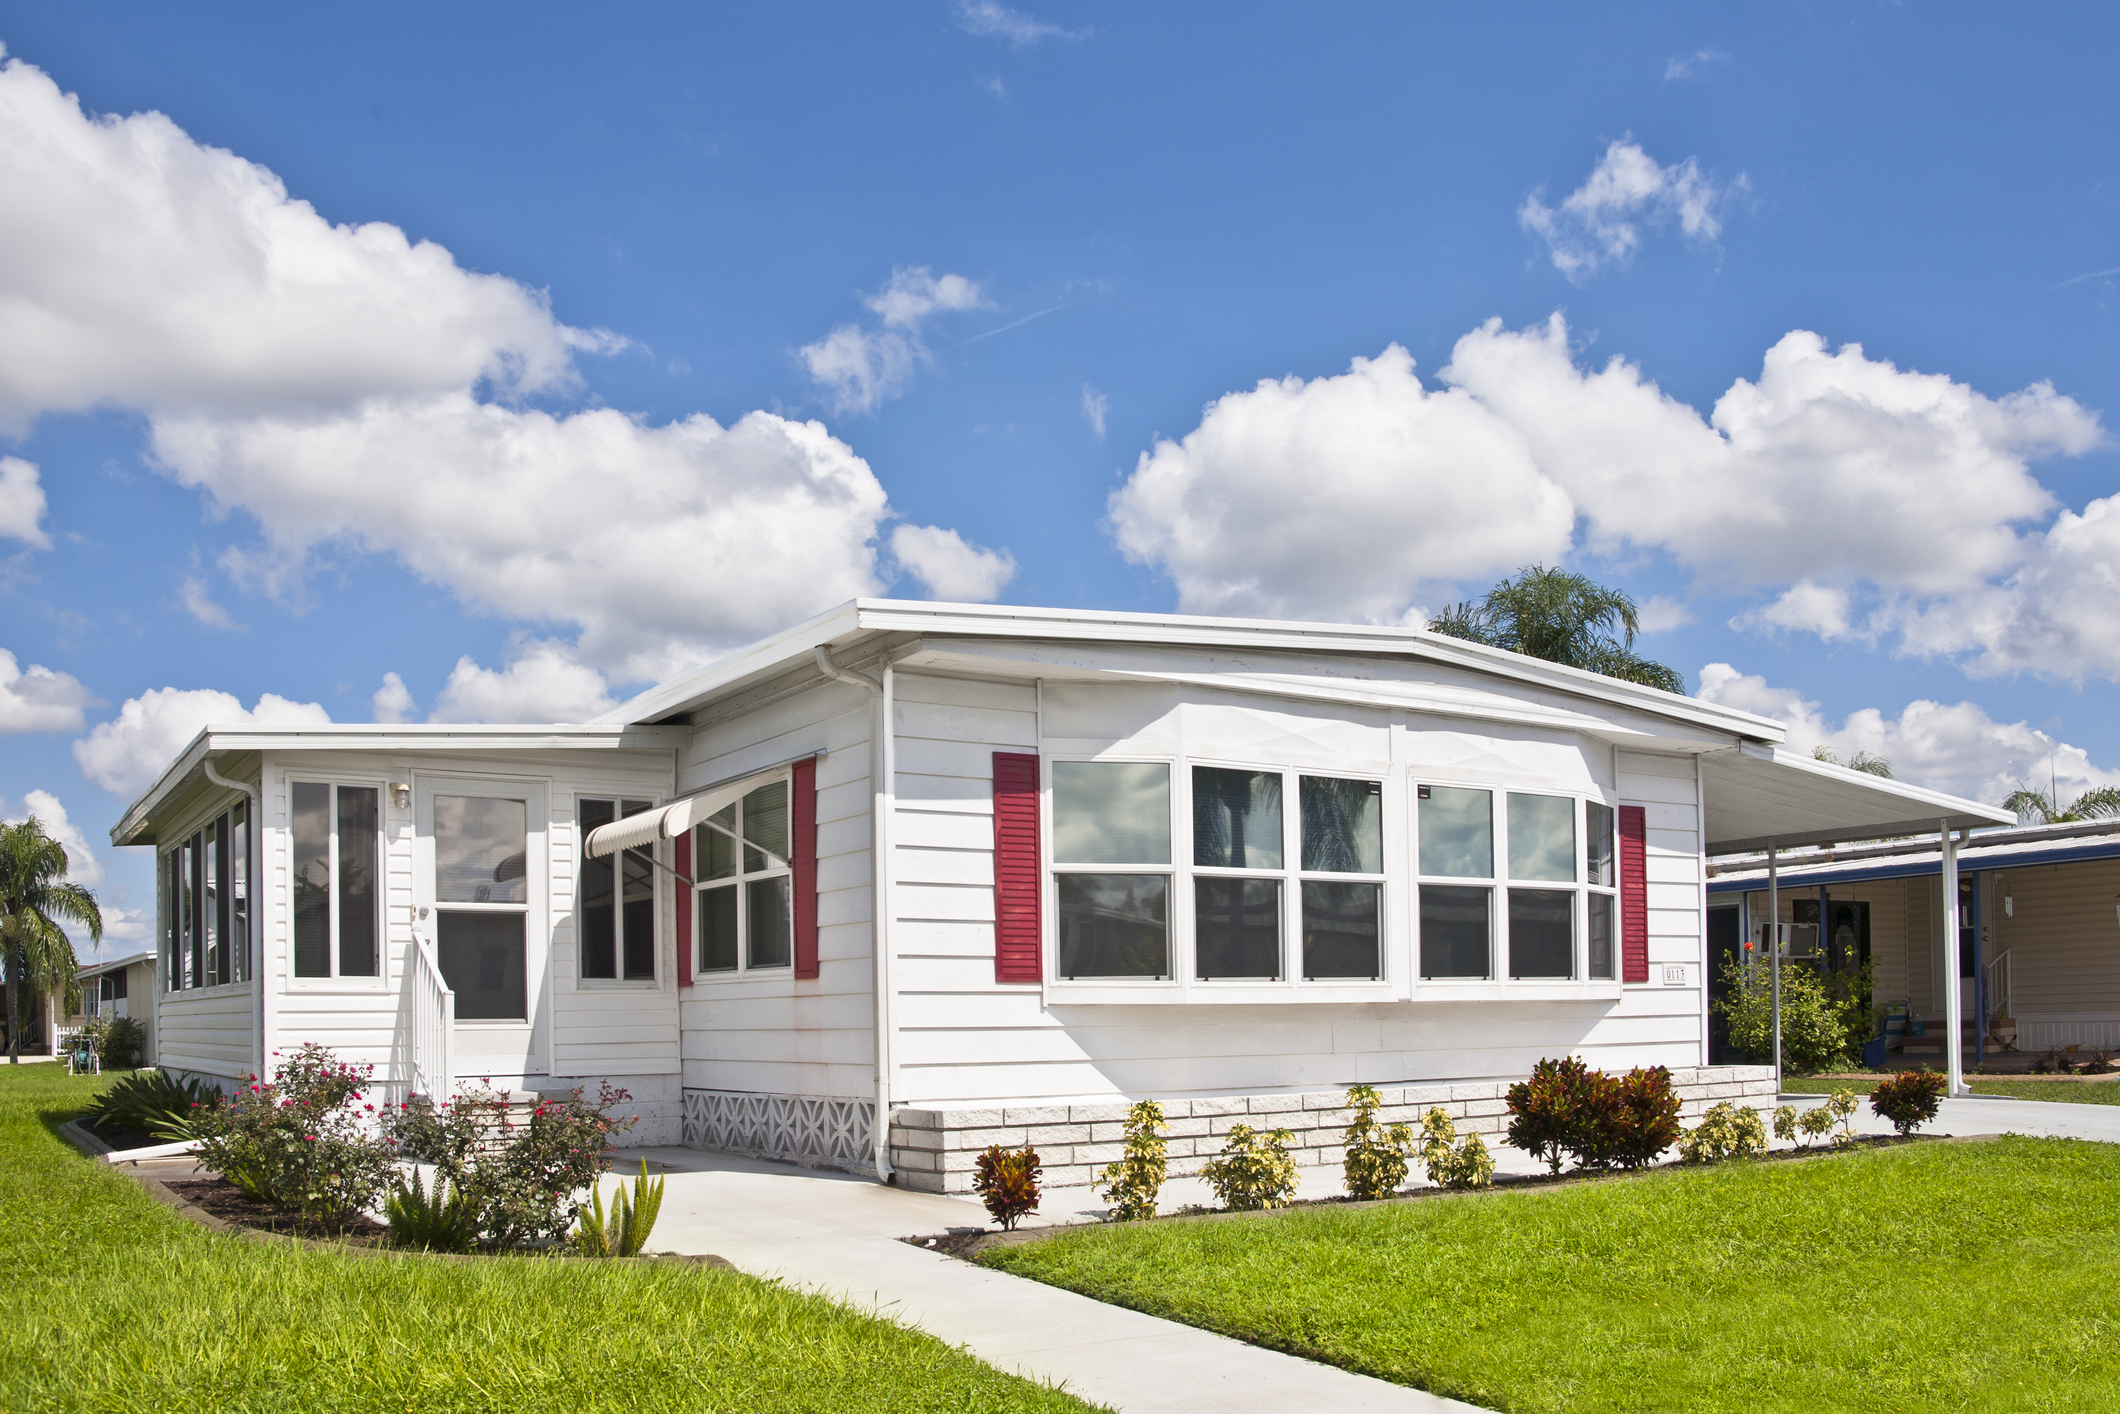 How to Maintain Your HVAC Unit If You Live in a Mobile Home